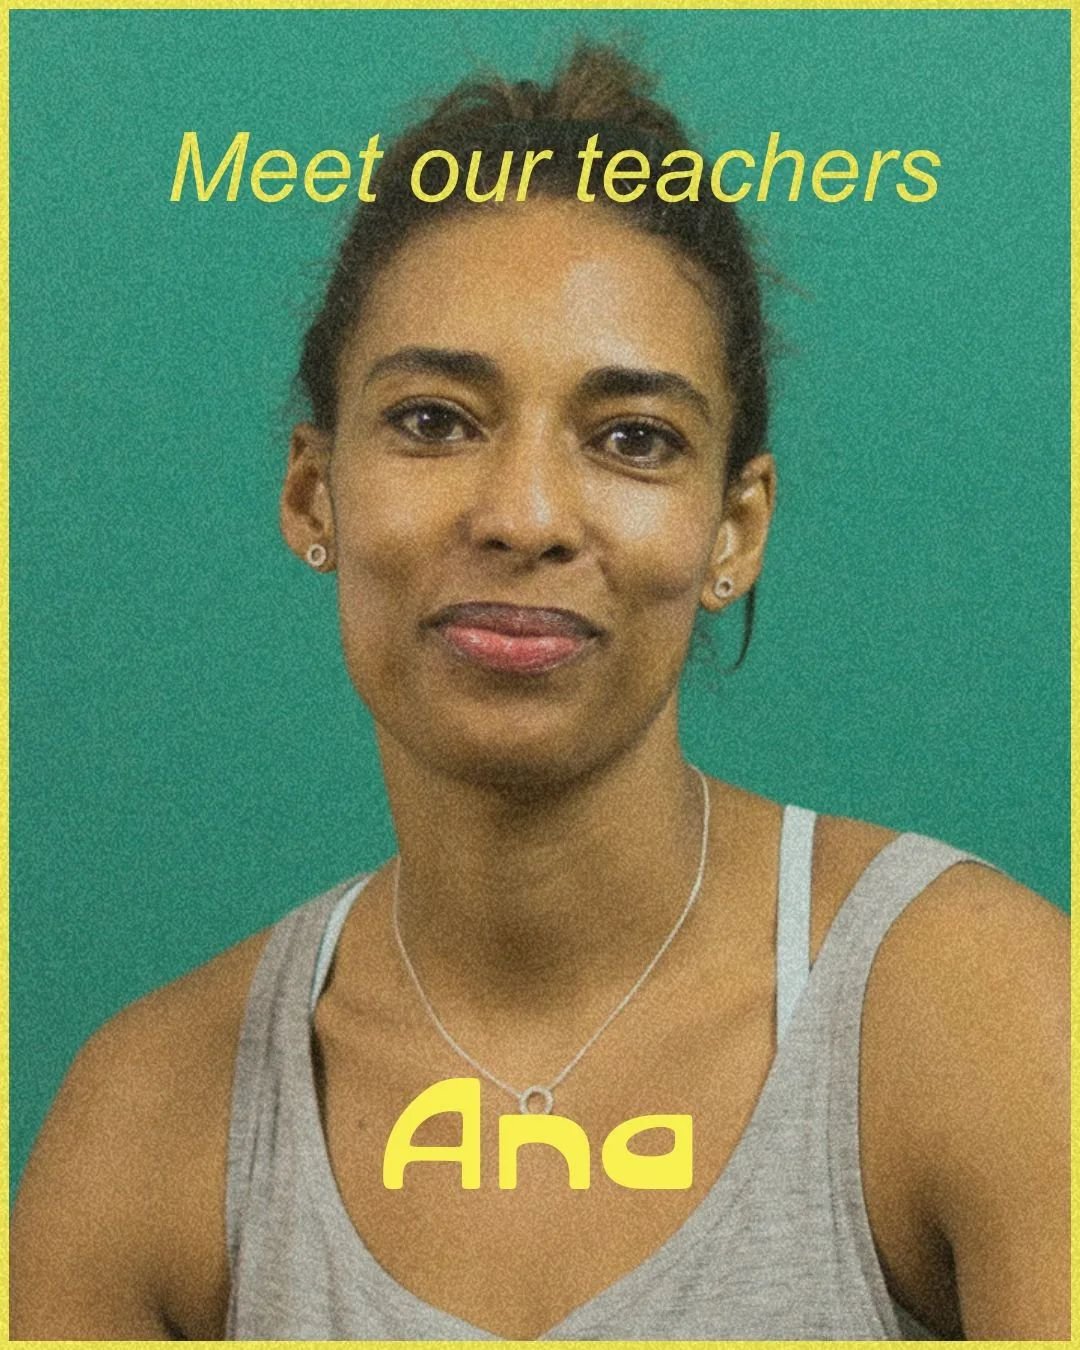 ✨ANA✨

Ana is a Vinyasa and Ashtanga yoga teacher and a mother to two boys. She teaches with a deep focus on the breath and body mindfulness.

She found yoga to be the perfect antidote to a busy life. For that reason, her classes are calming, groundi